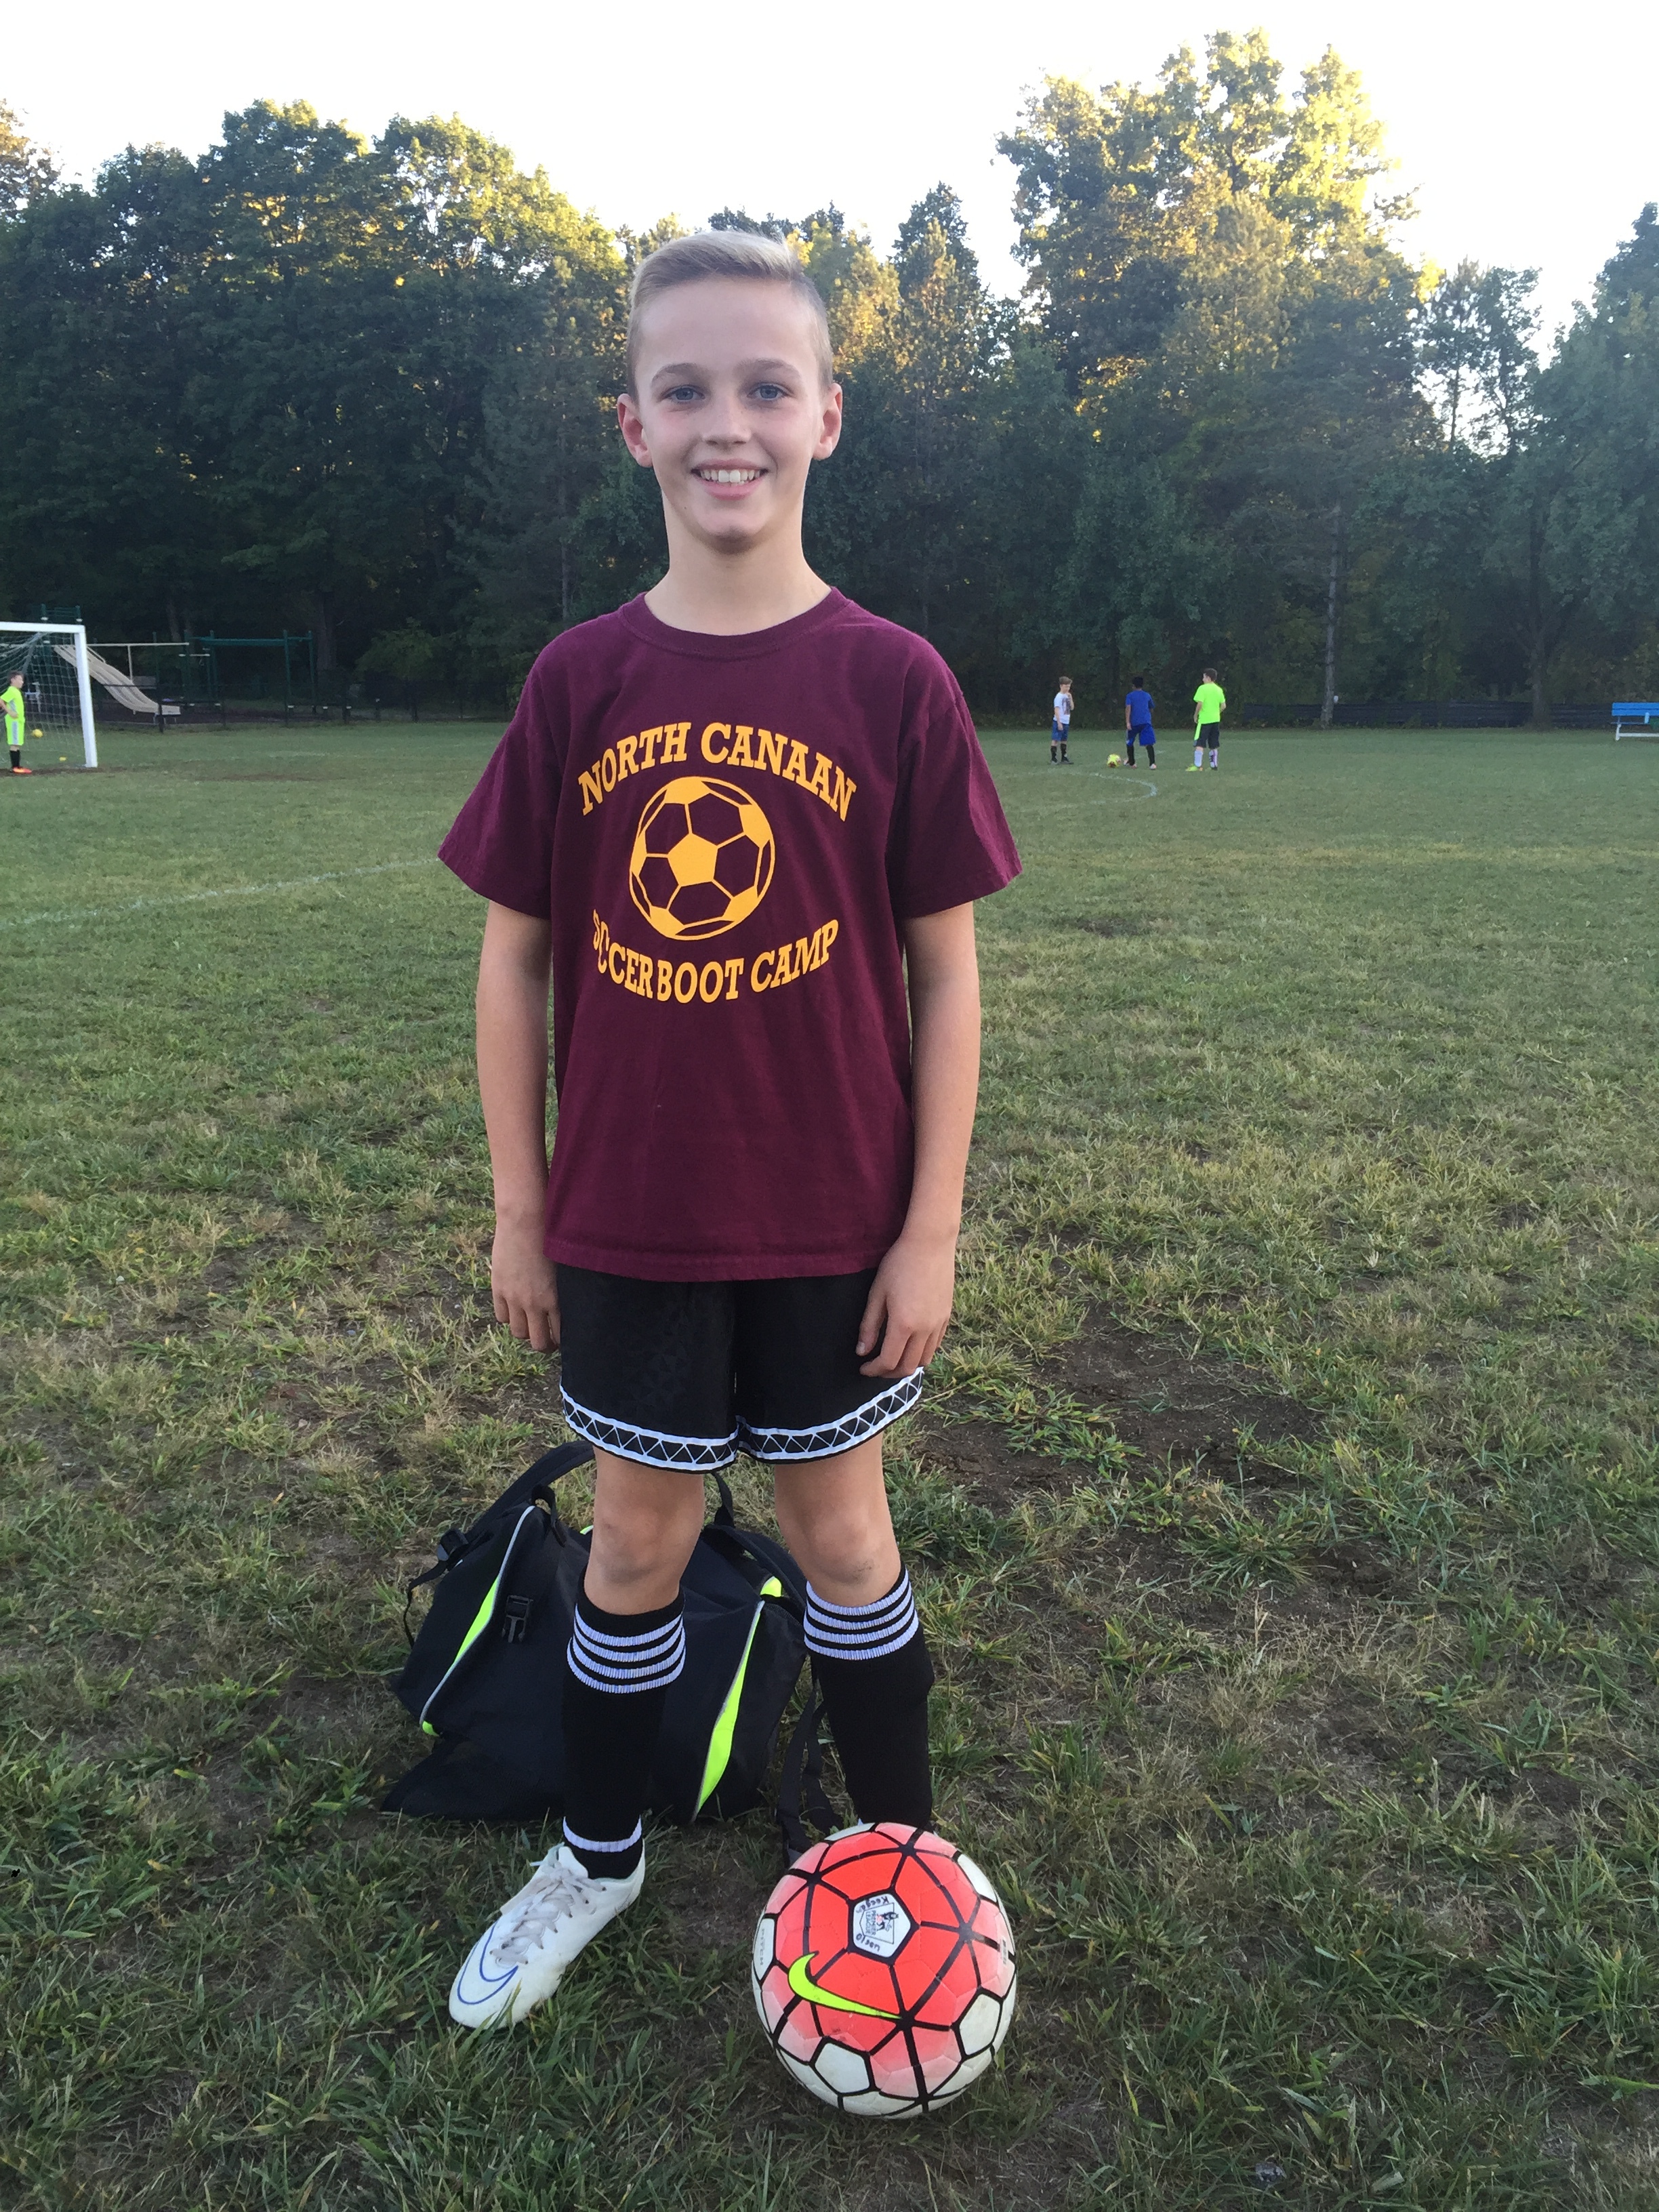 2016 Canaan Foundation Grant Recipient - North Canaan Youth Soccer